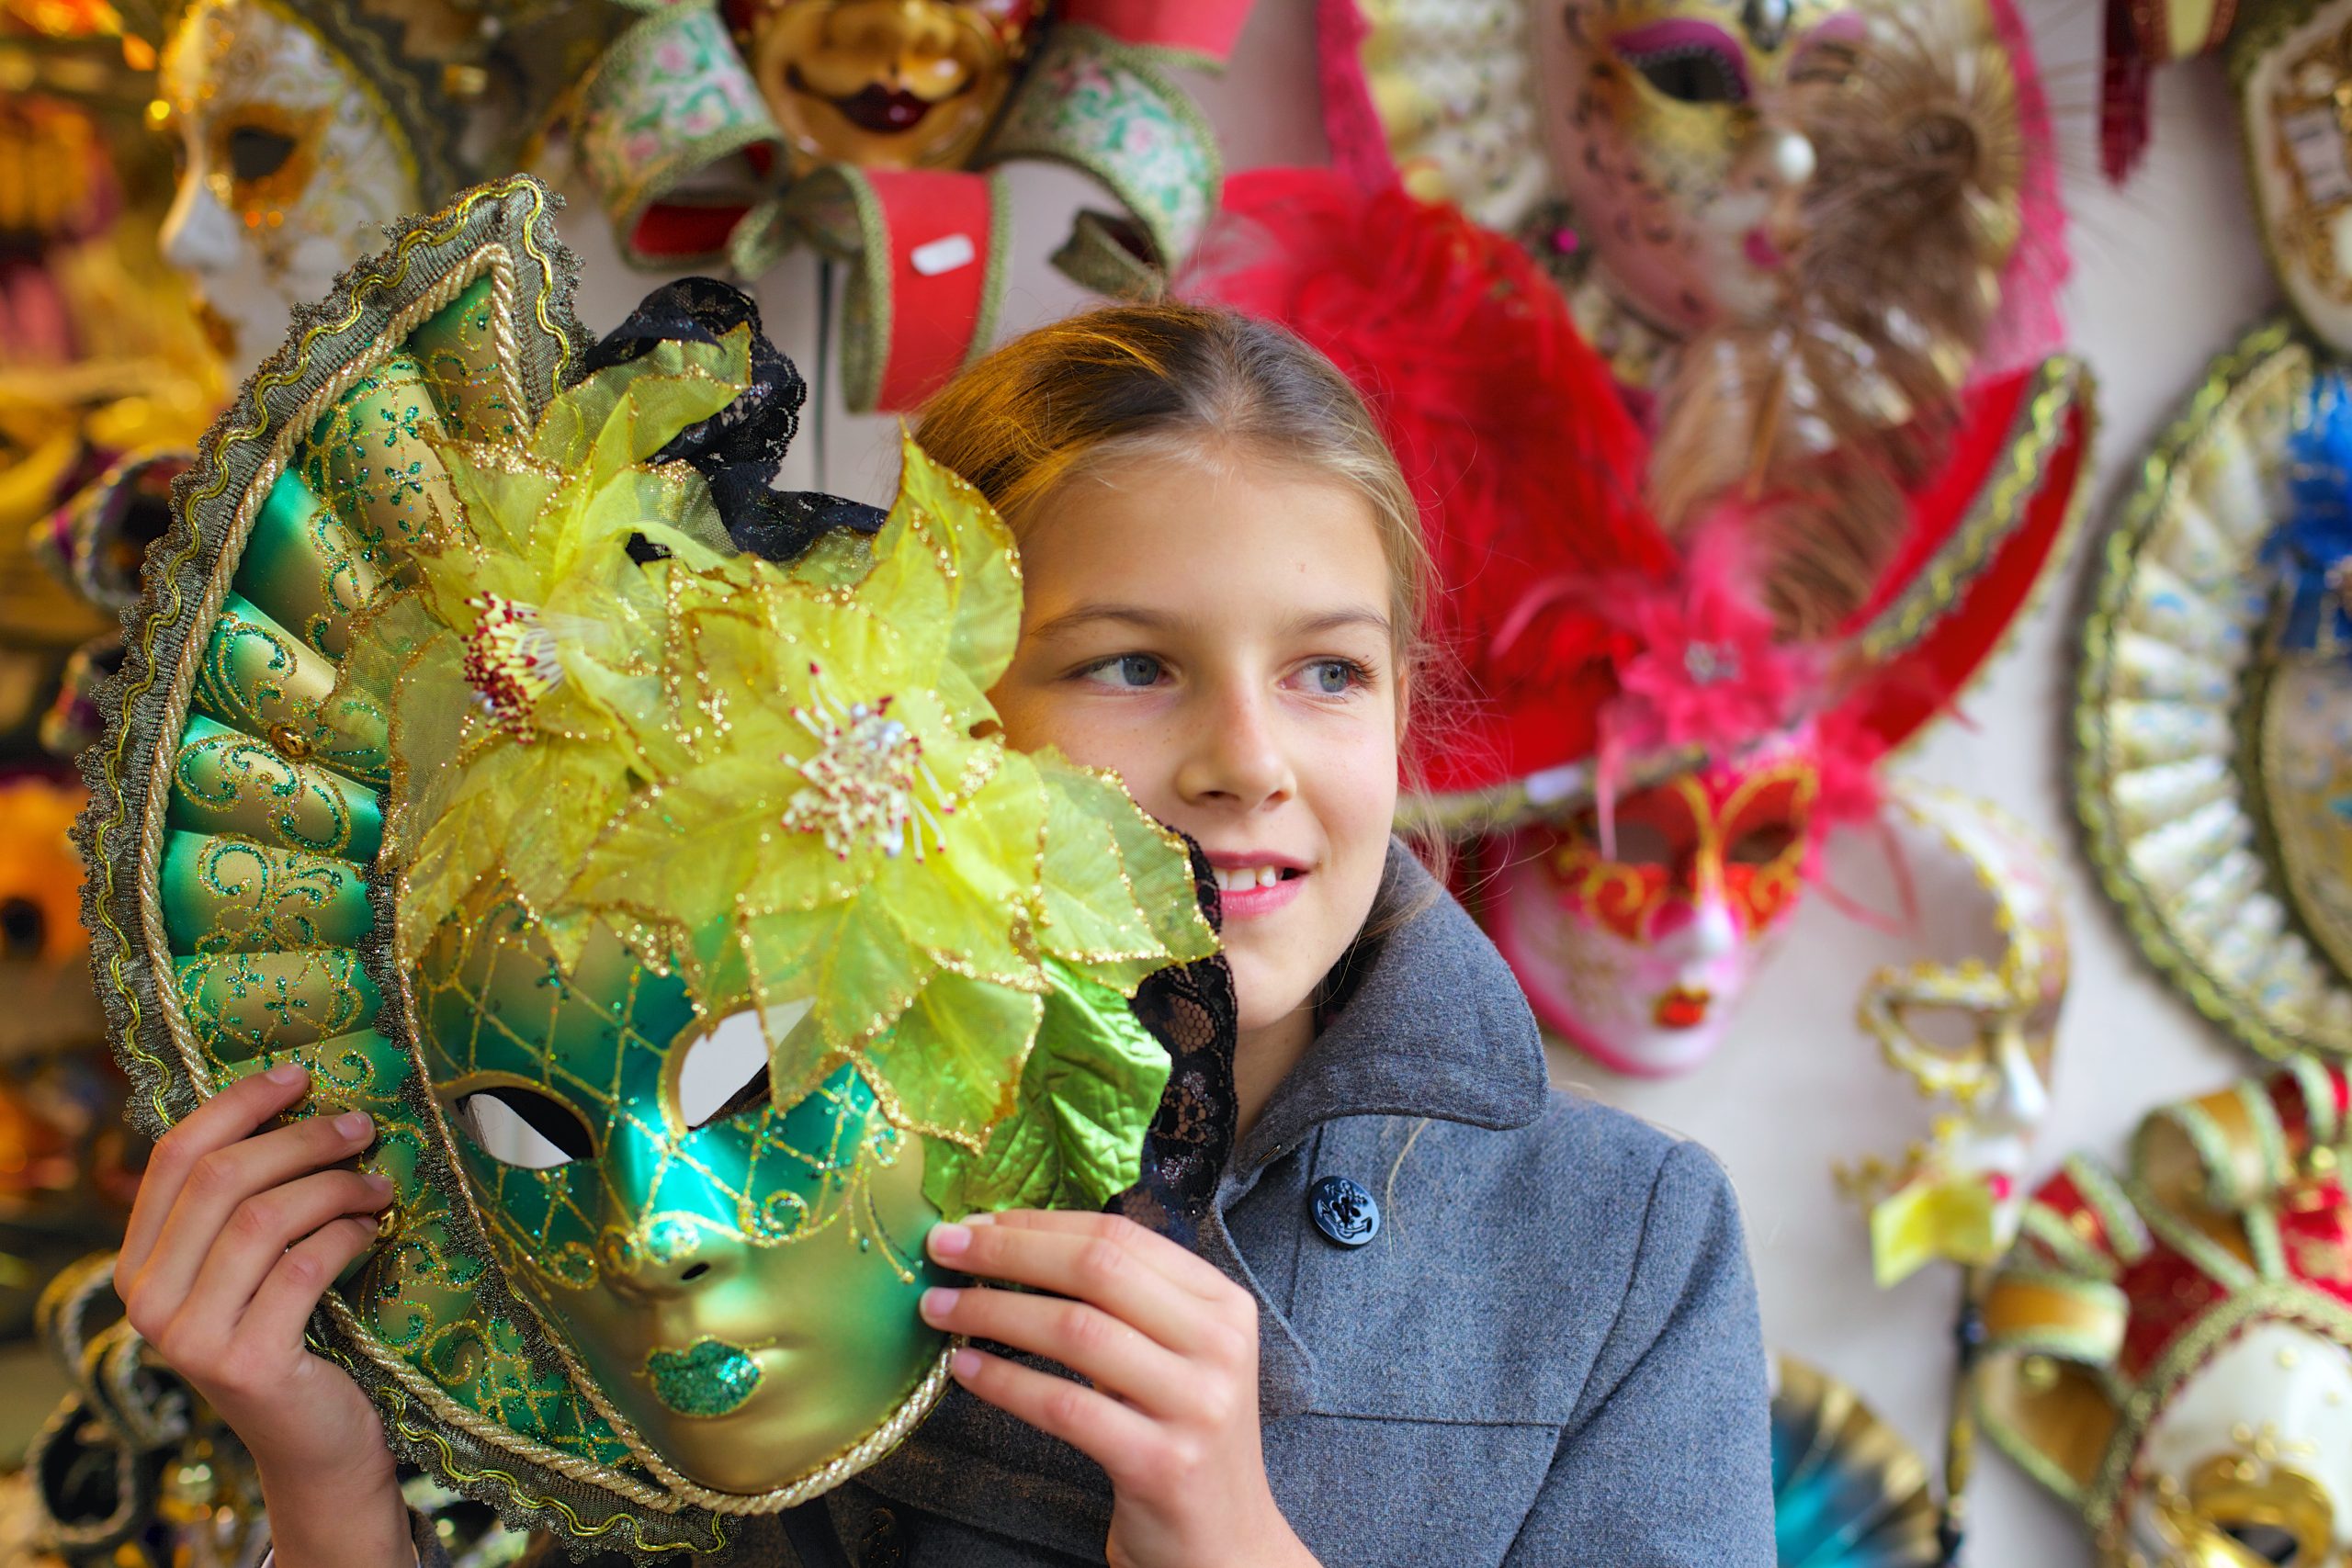 blonde pre-teenaged girl holds a lime green masquerade ball mask. In the background is a wall full of similar masks in pink, gold, and red.